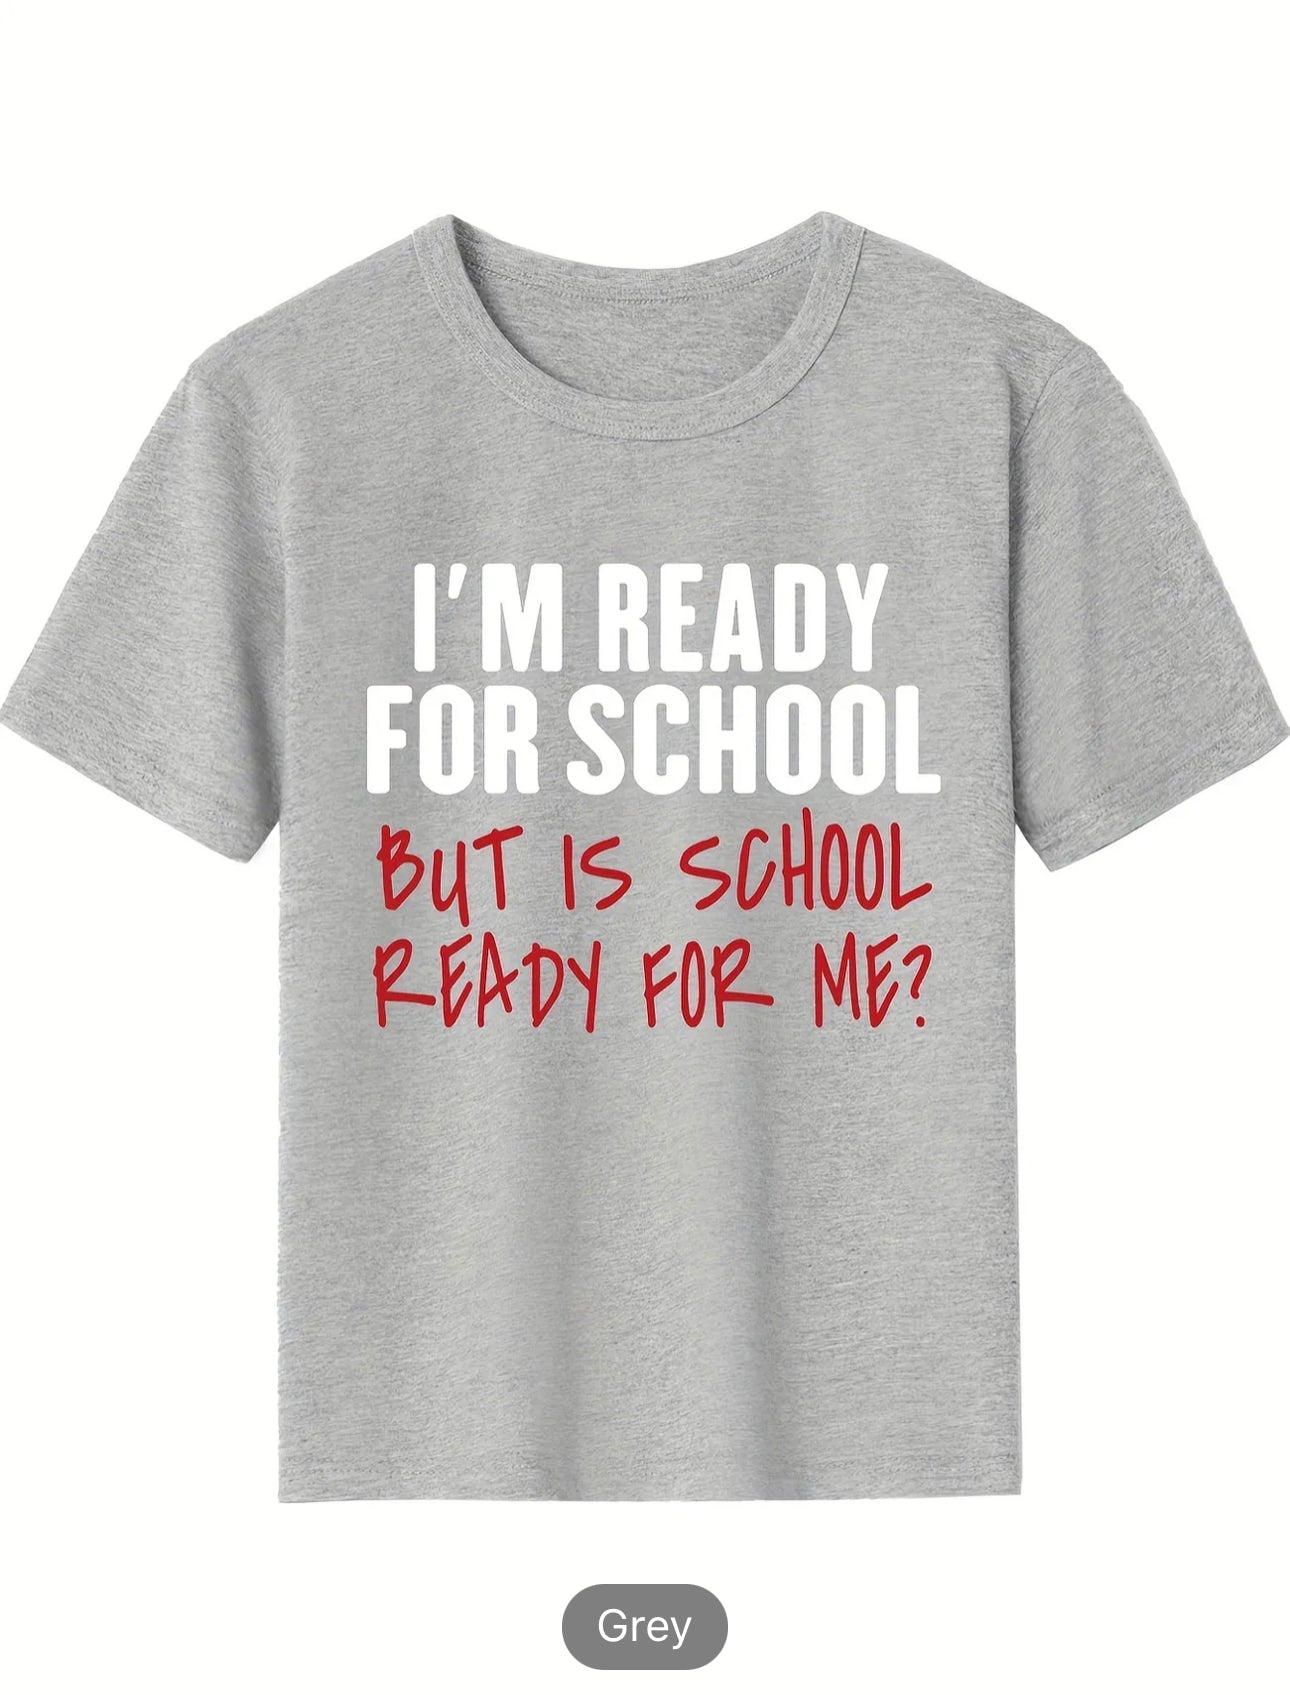 READY FOR SCHOOL BUT IS SCHOOL READY FORME Letter Print Boys Creative Cotton T-shirt, Casual Lightweight Comfy Short Sleeve Crew Neck Tee Tops, Kids Clothings For Summer